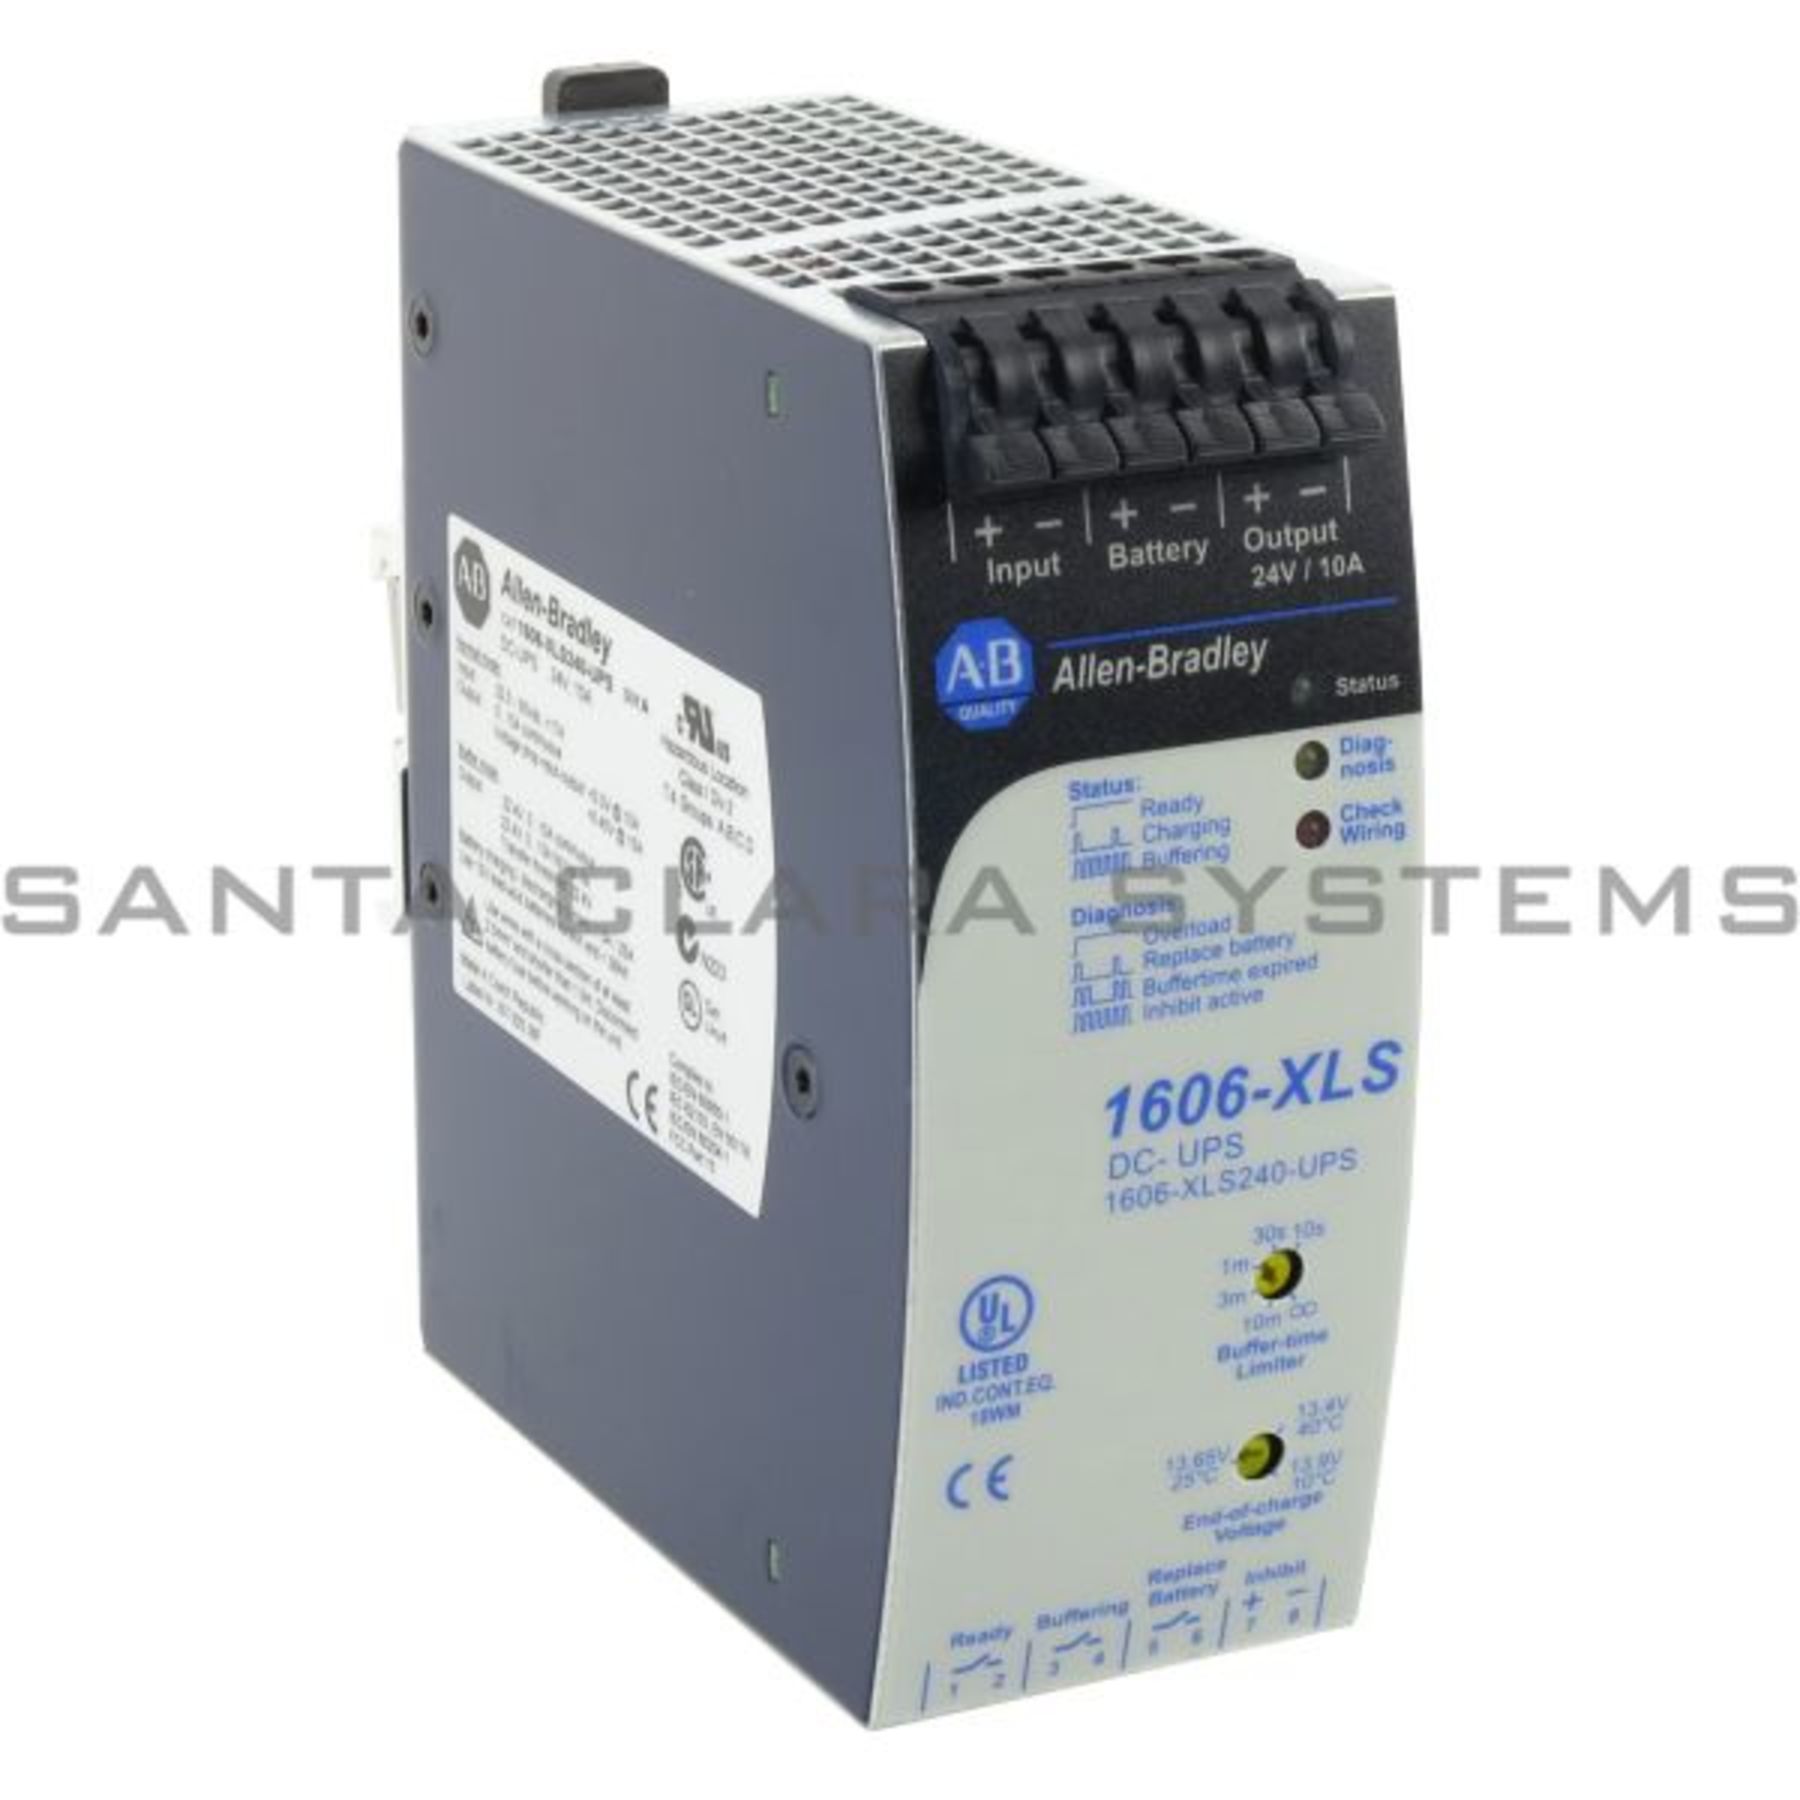 1606-XLS240-UPS Allen Bradley In stock and ready to ship - Santa